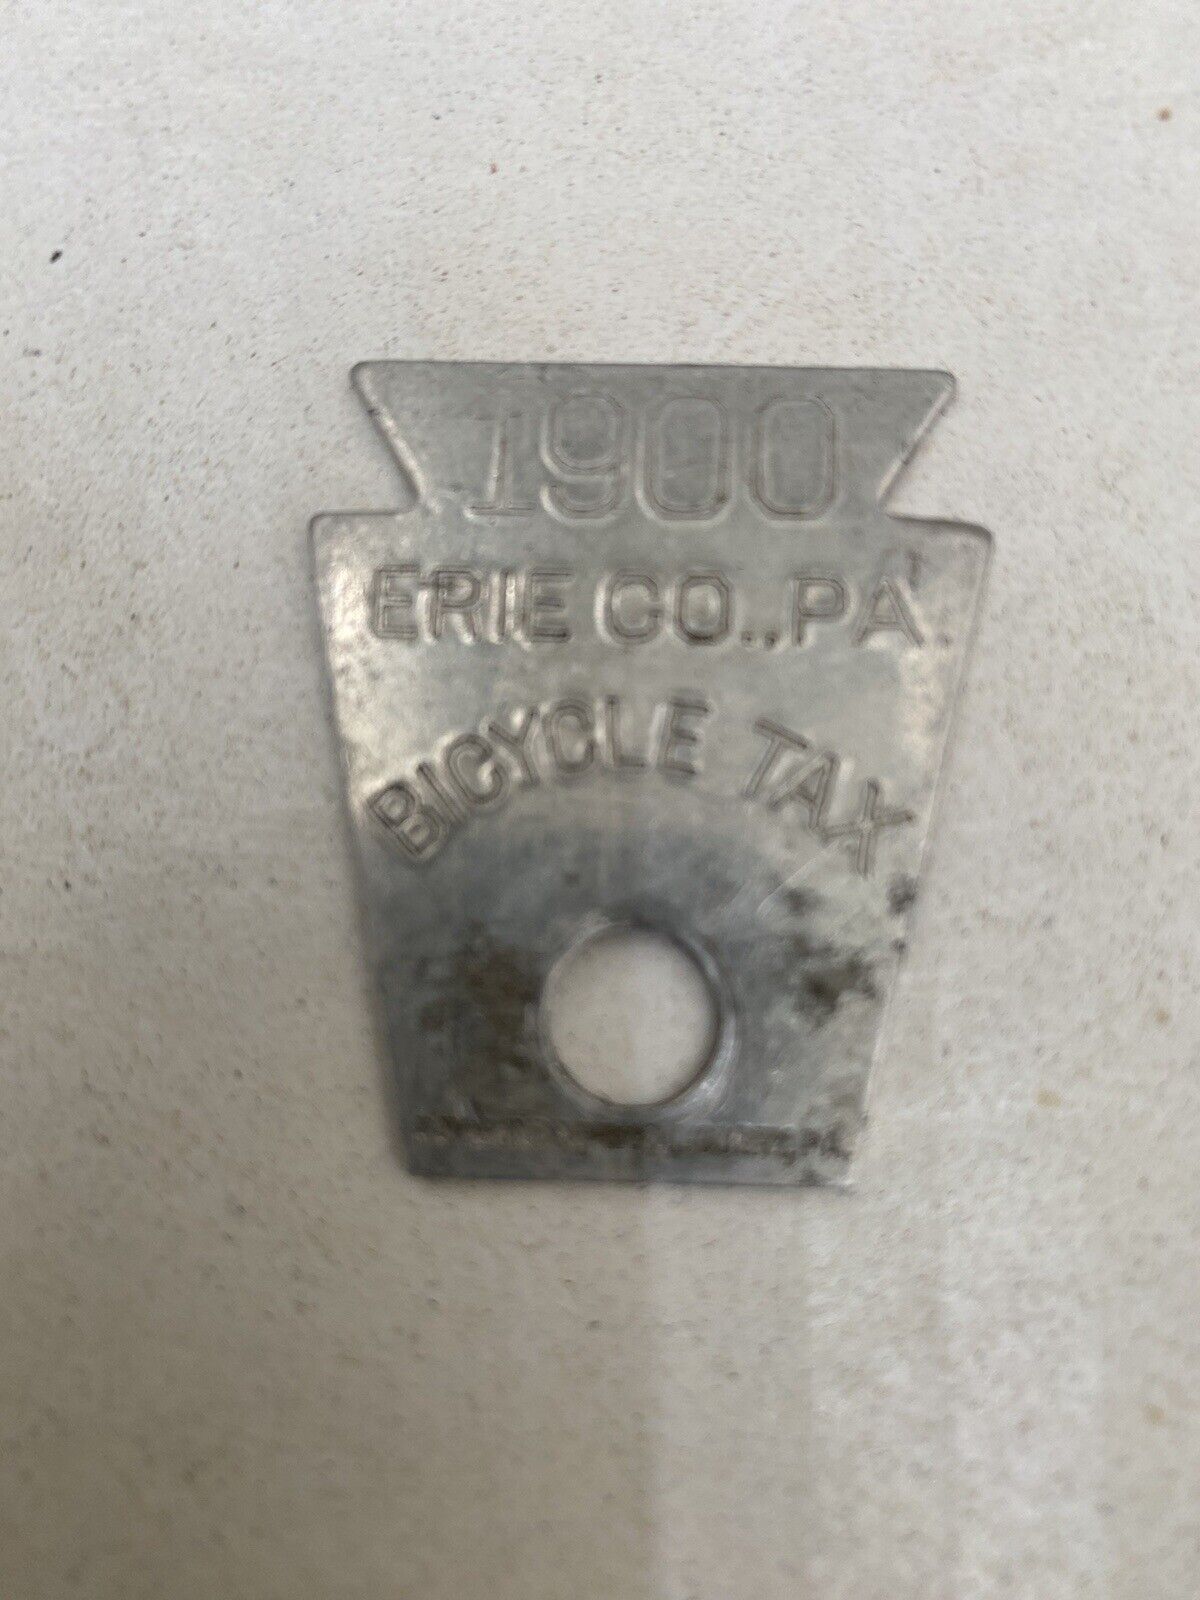 Very Rare 1900 Erie County PA  bicycle Tax Plate